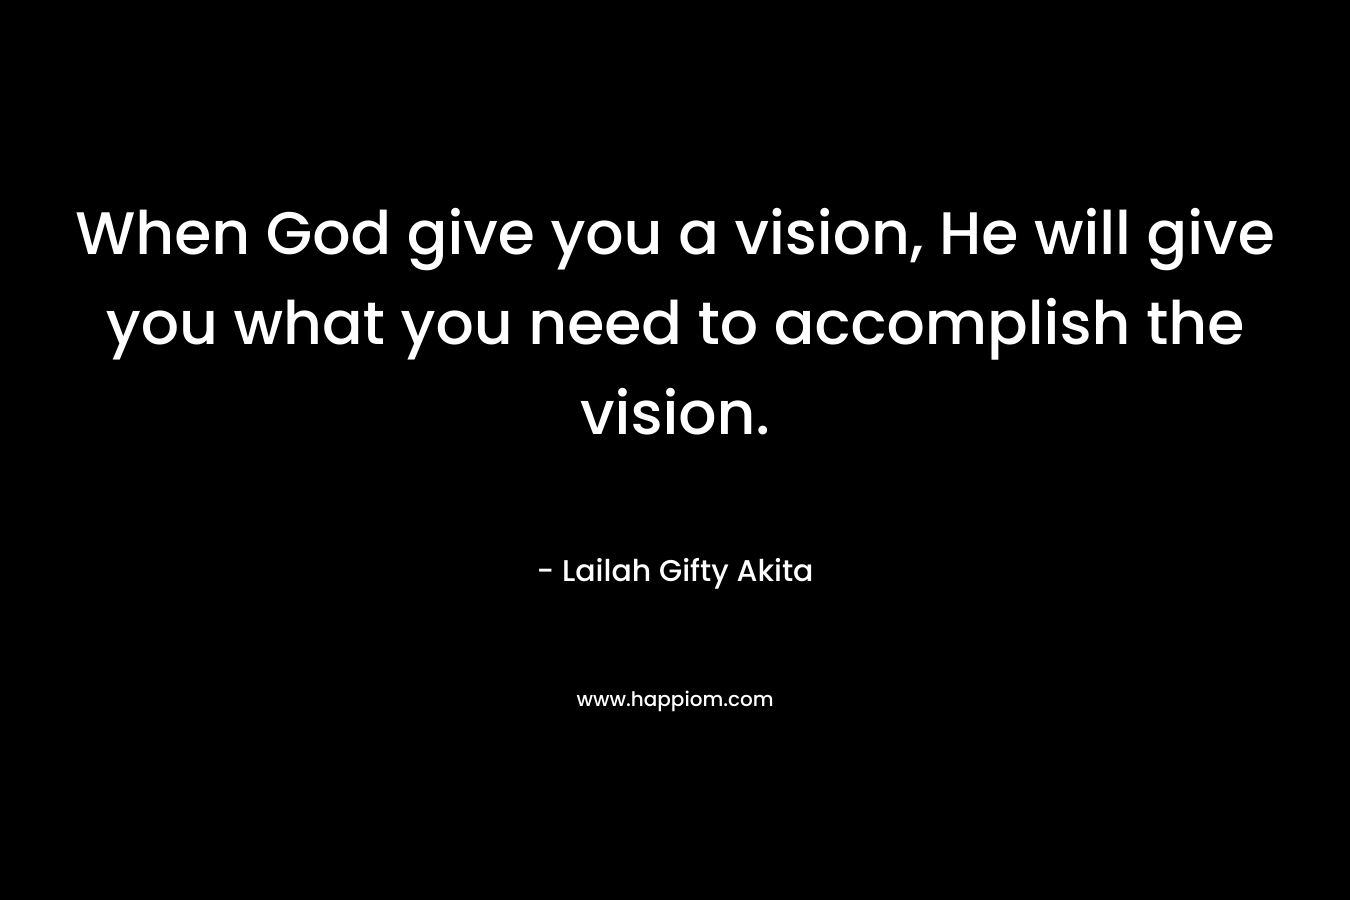 When God give you a vision, He will give you what you need to accomplish the vision.